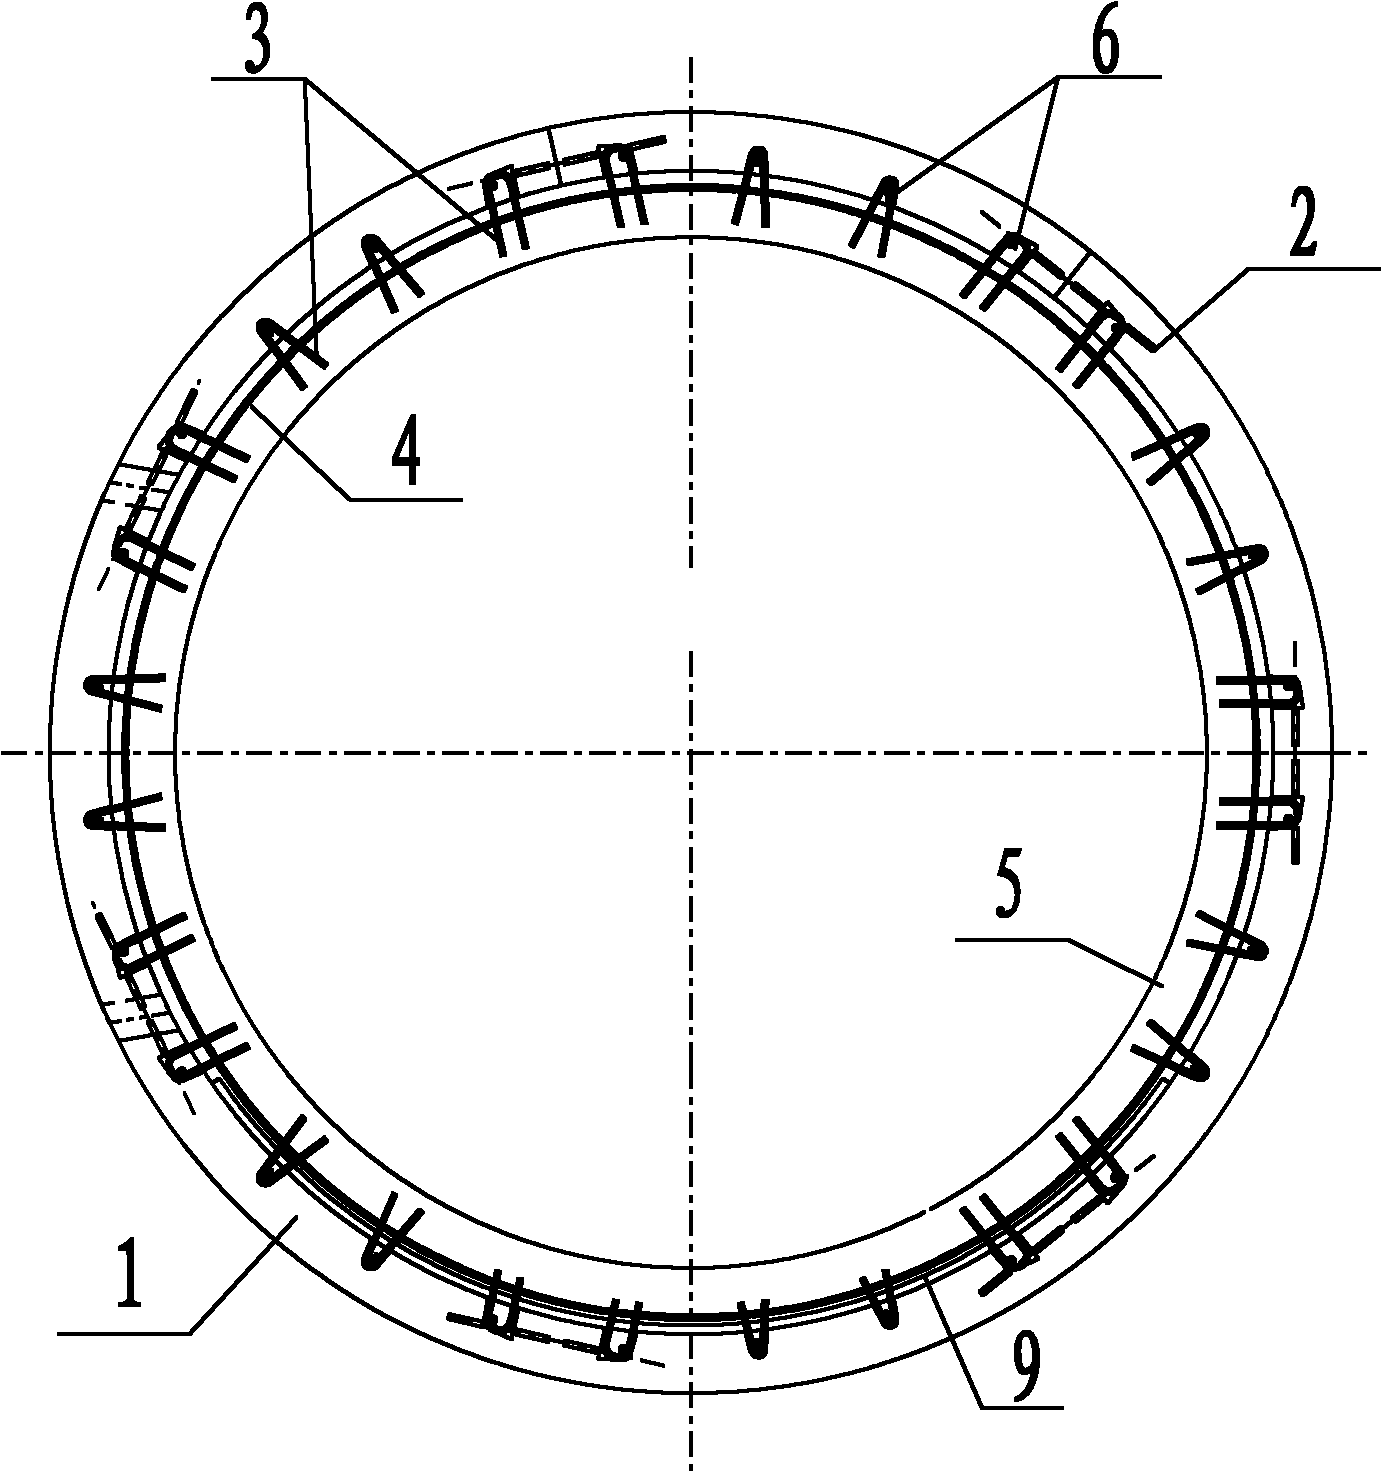 Water conveyance tunnel with prestressed composite lining for shield tunnelling